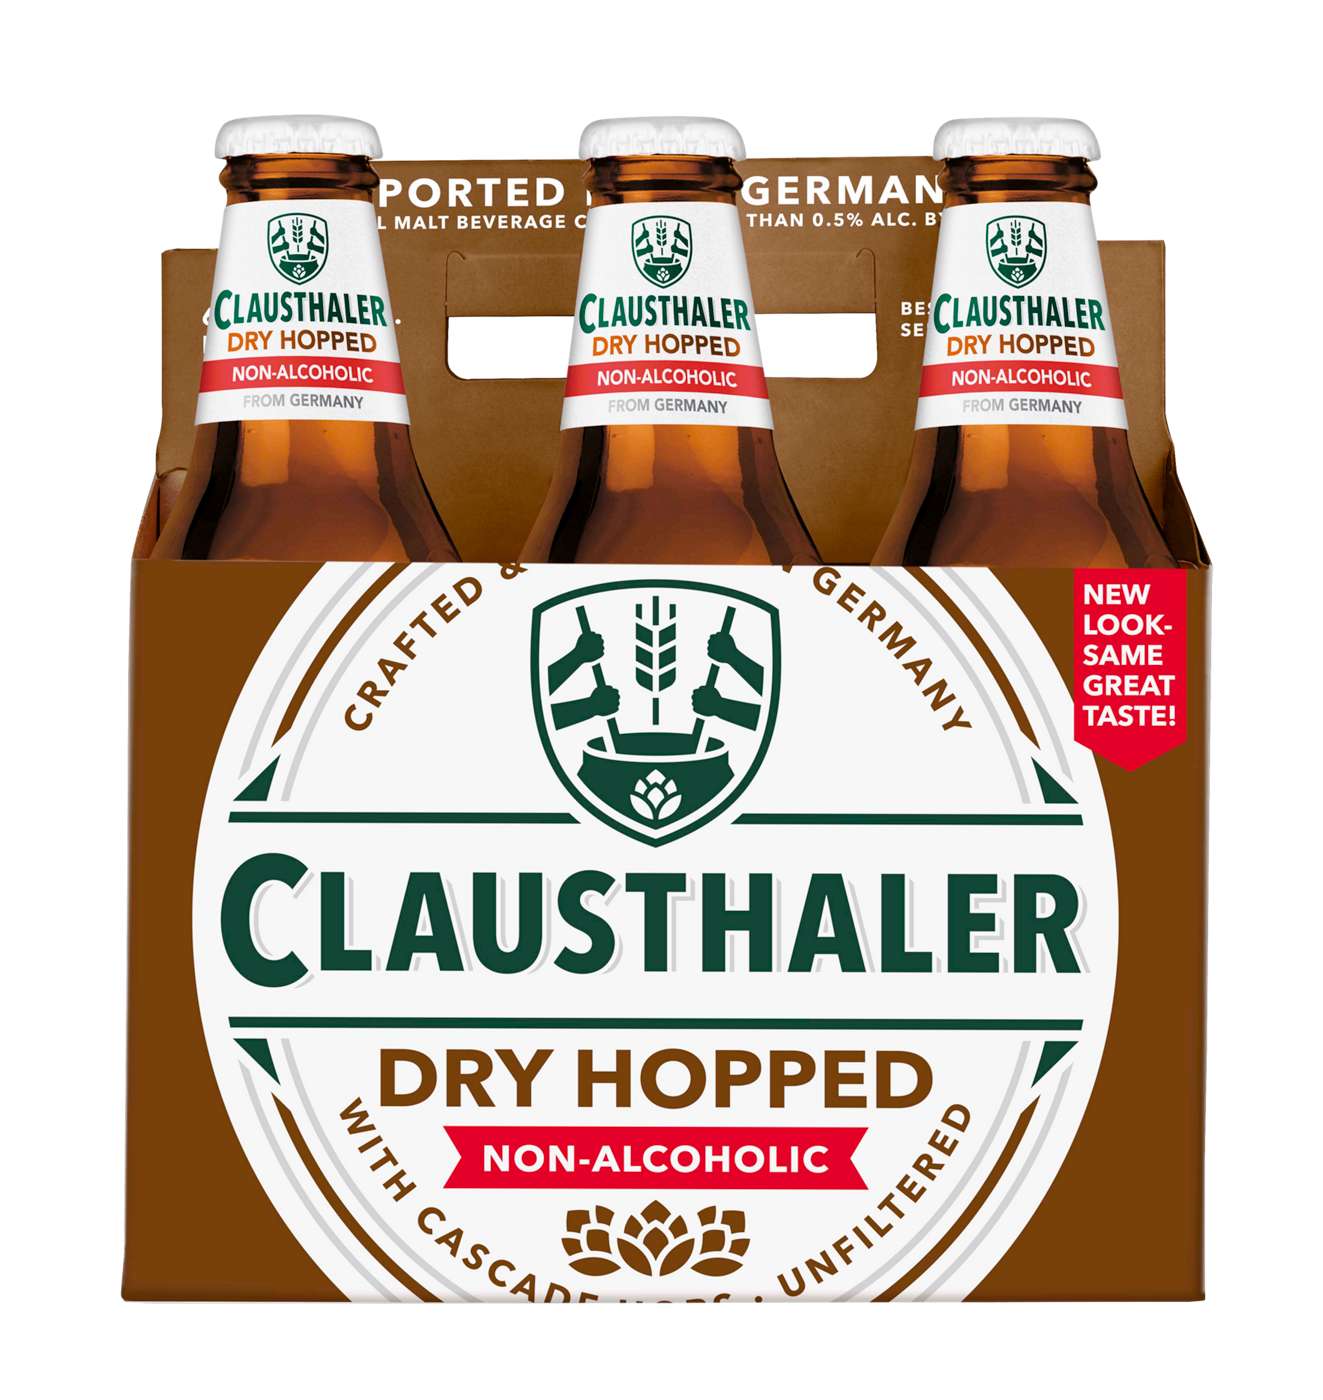 Clausthaler Dry Hopped Non-Alcoholic Beer 6 pk Bottles; image 2 of 2